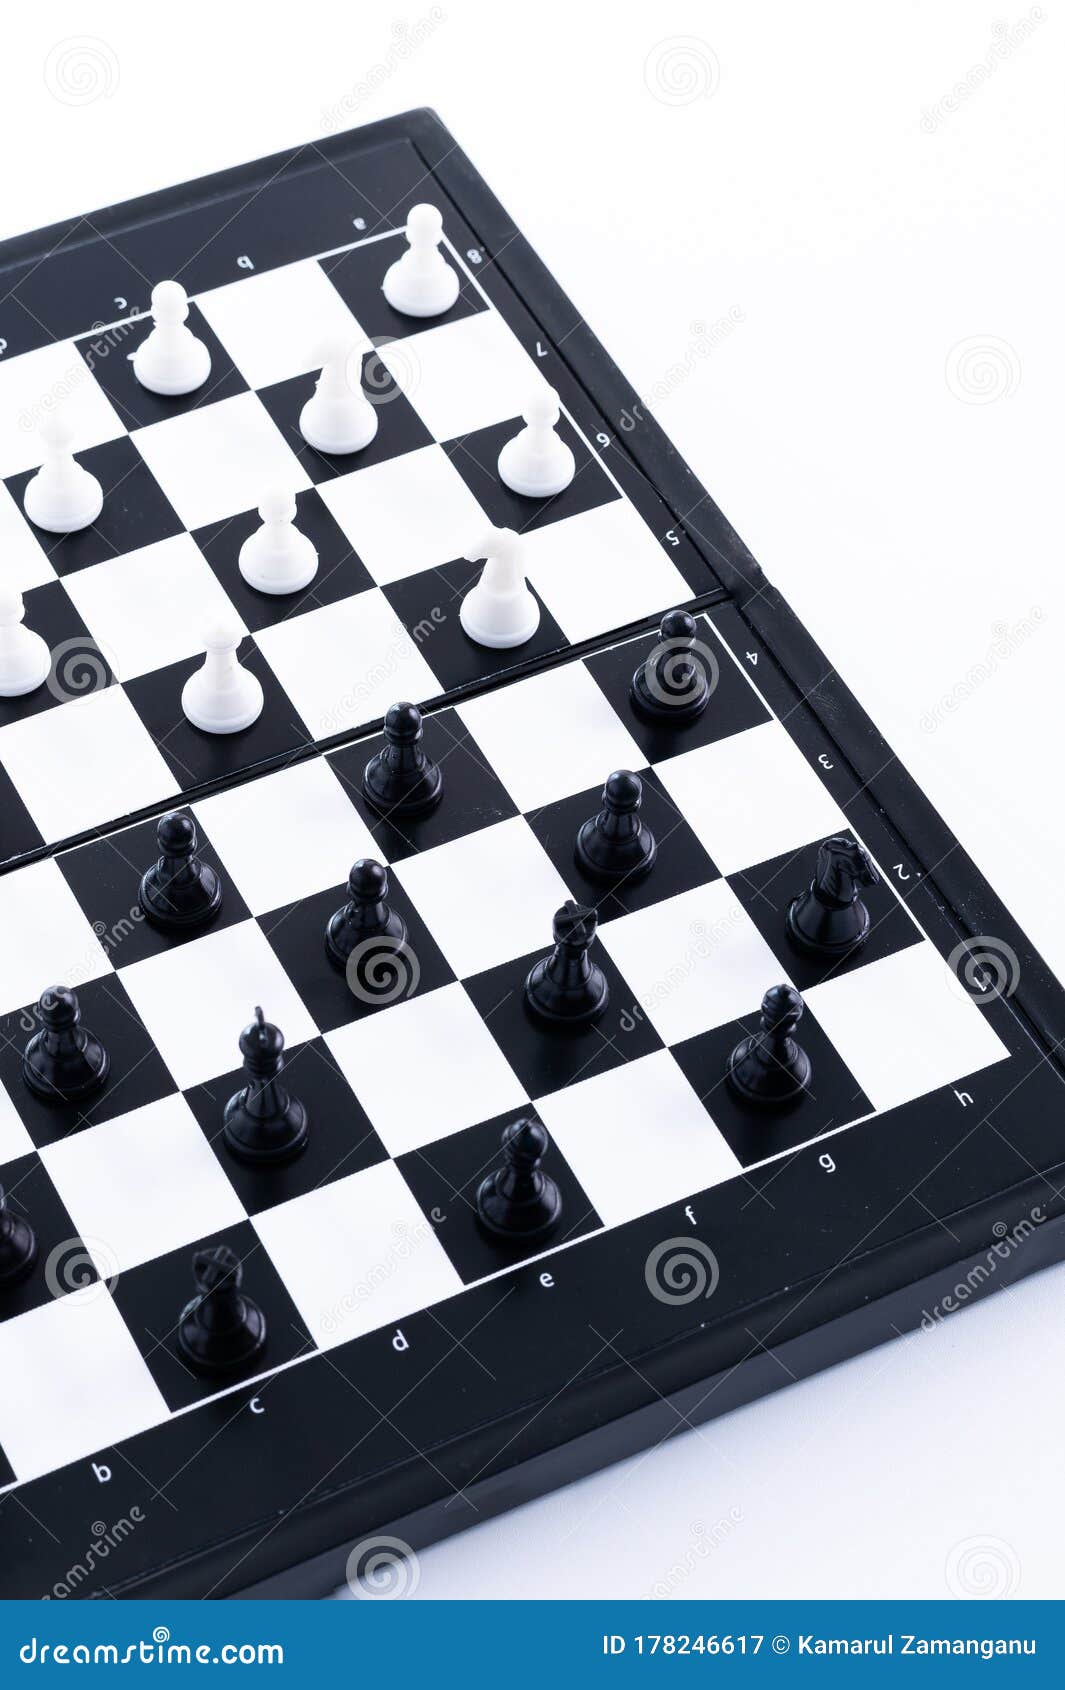 Empty Chess Board with Coordinates Isolated on White Stock Image - Image of  competition, play: 172496255